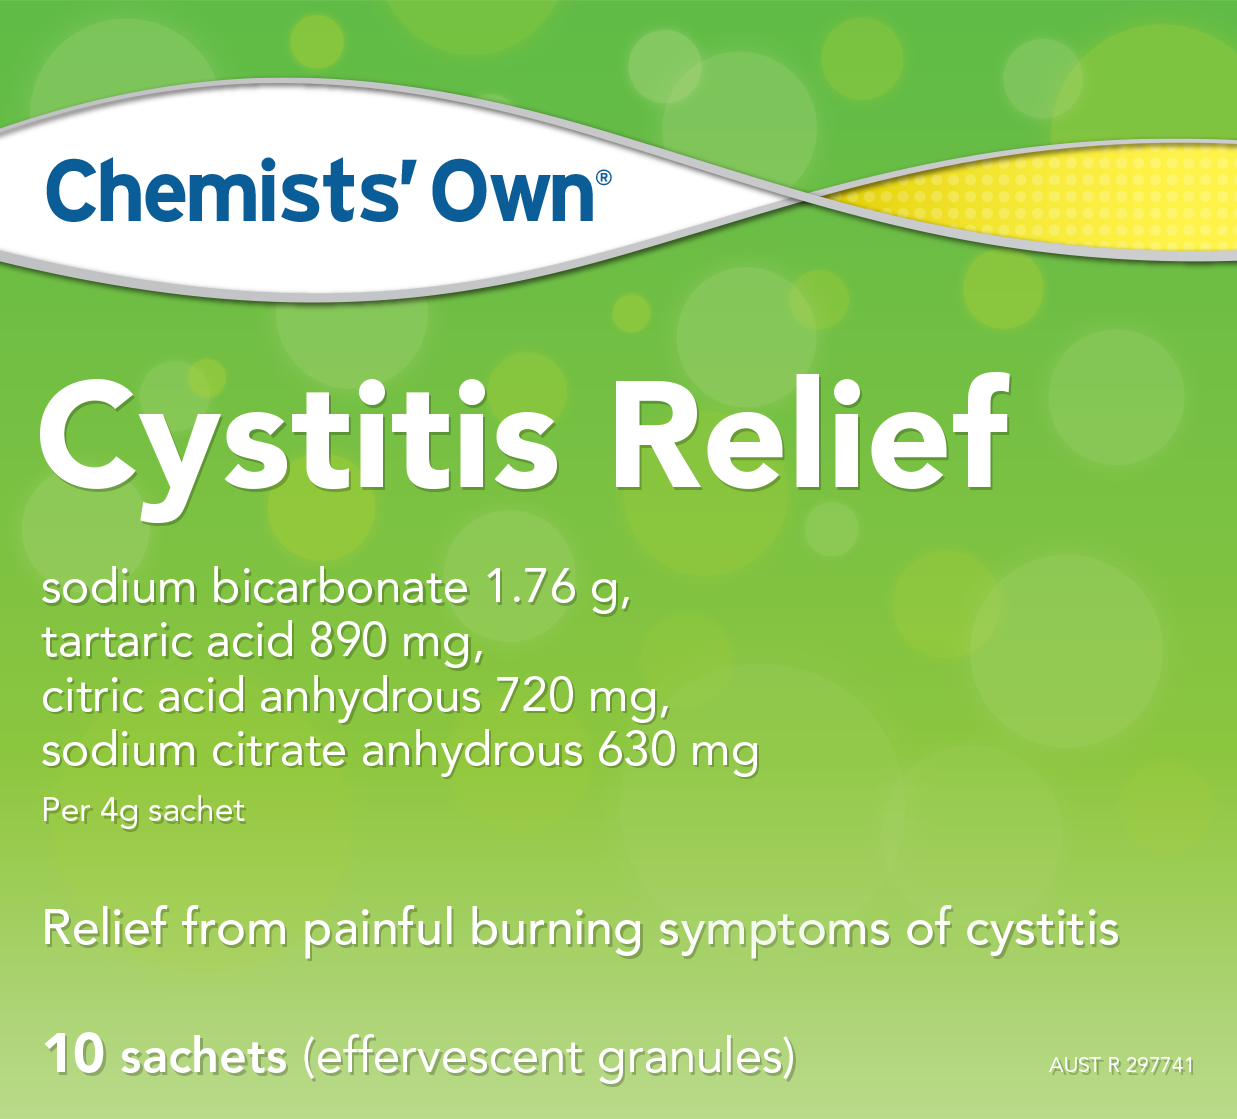 CO Cystitis Relief Sachets 4g 10